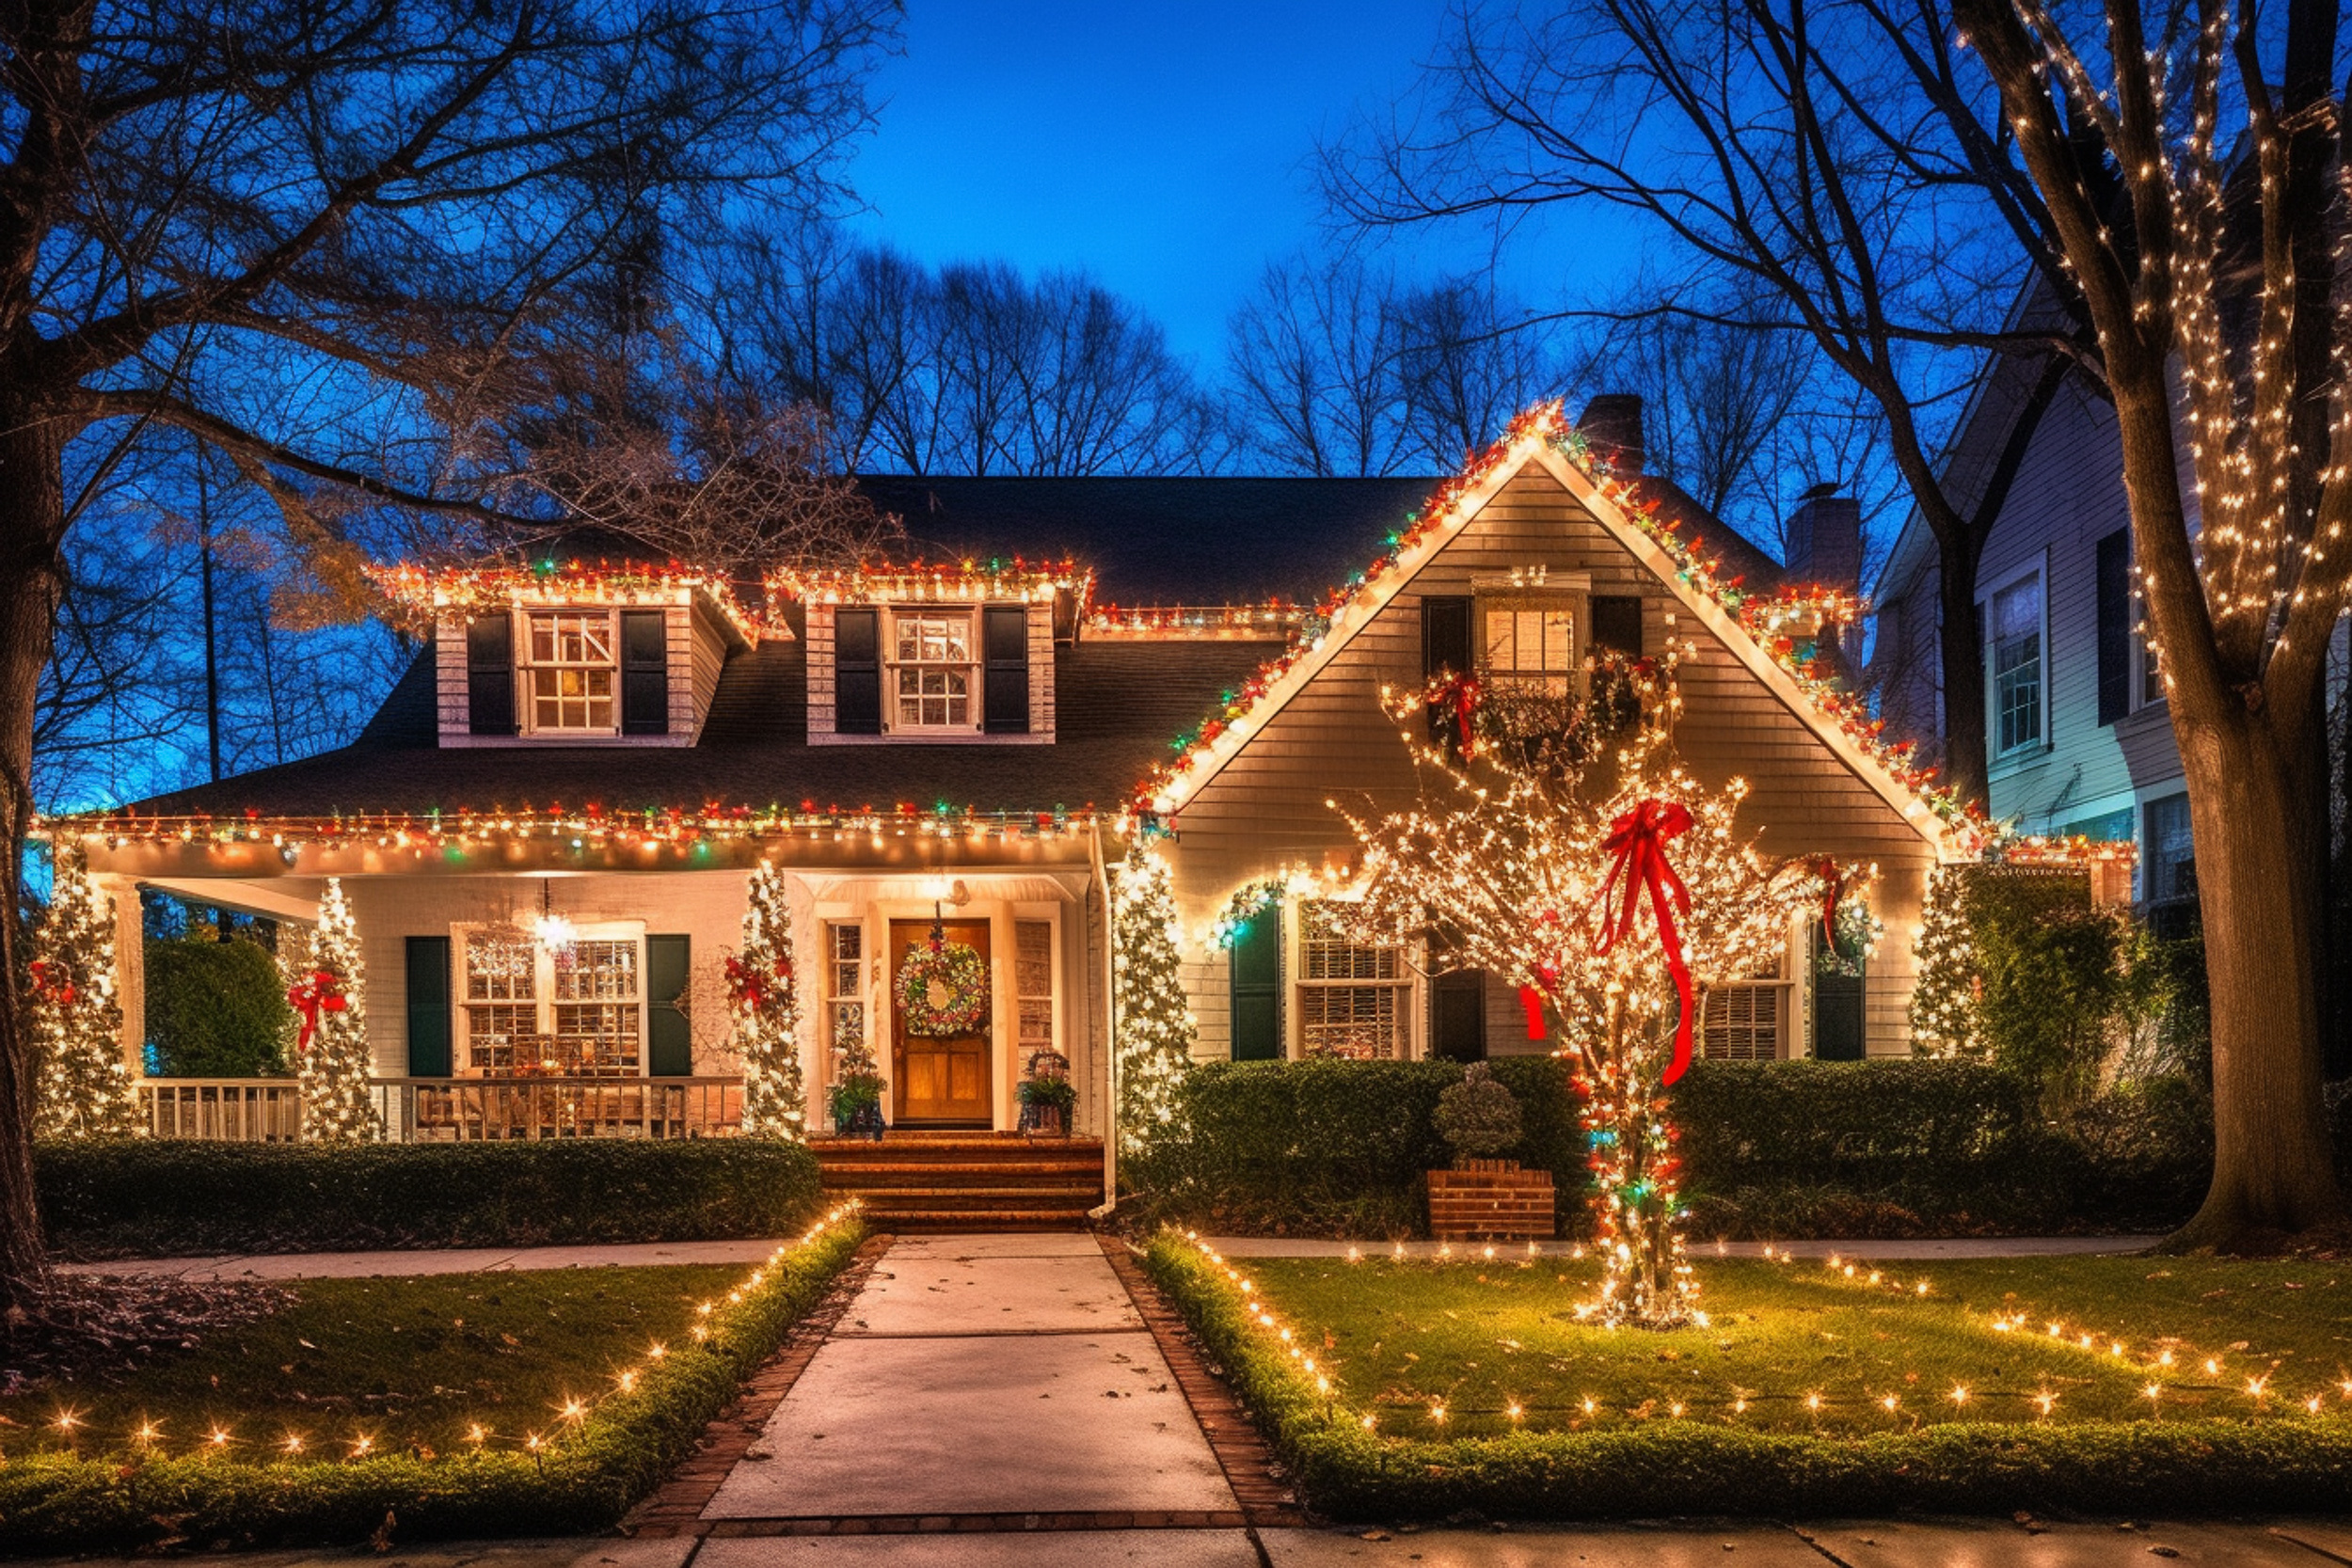 Christmas-decorated house in North Carolina